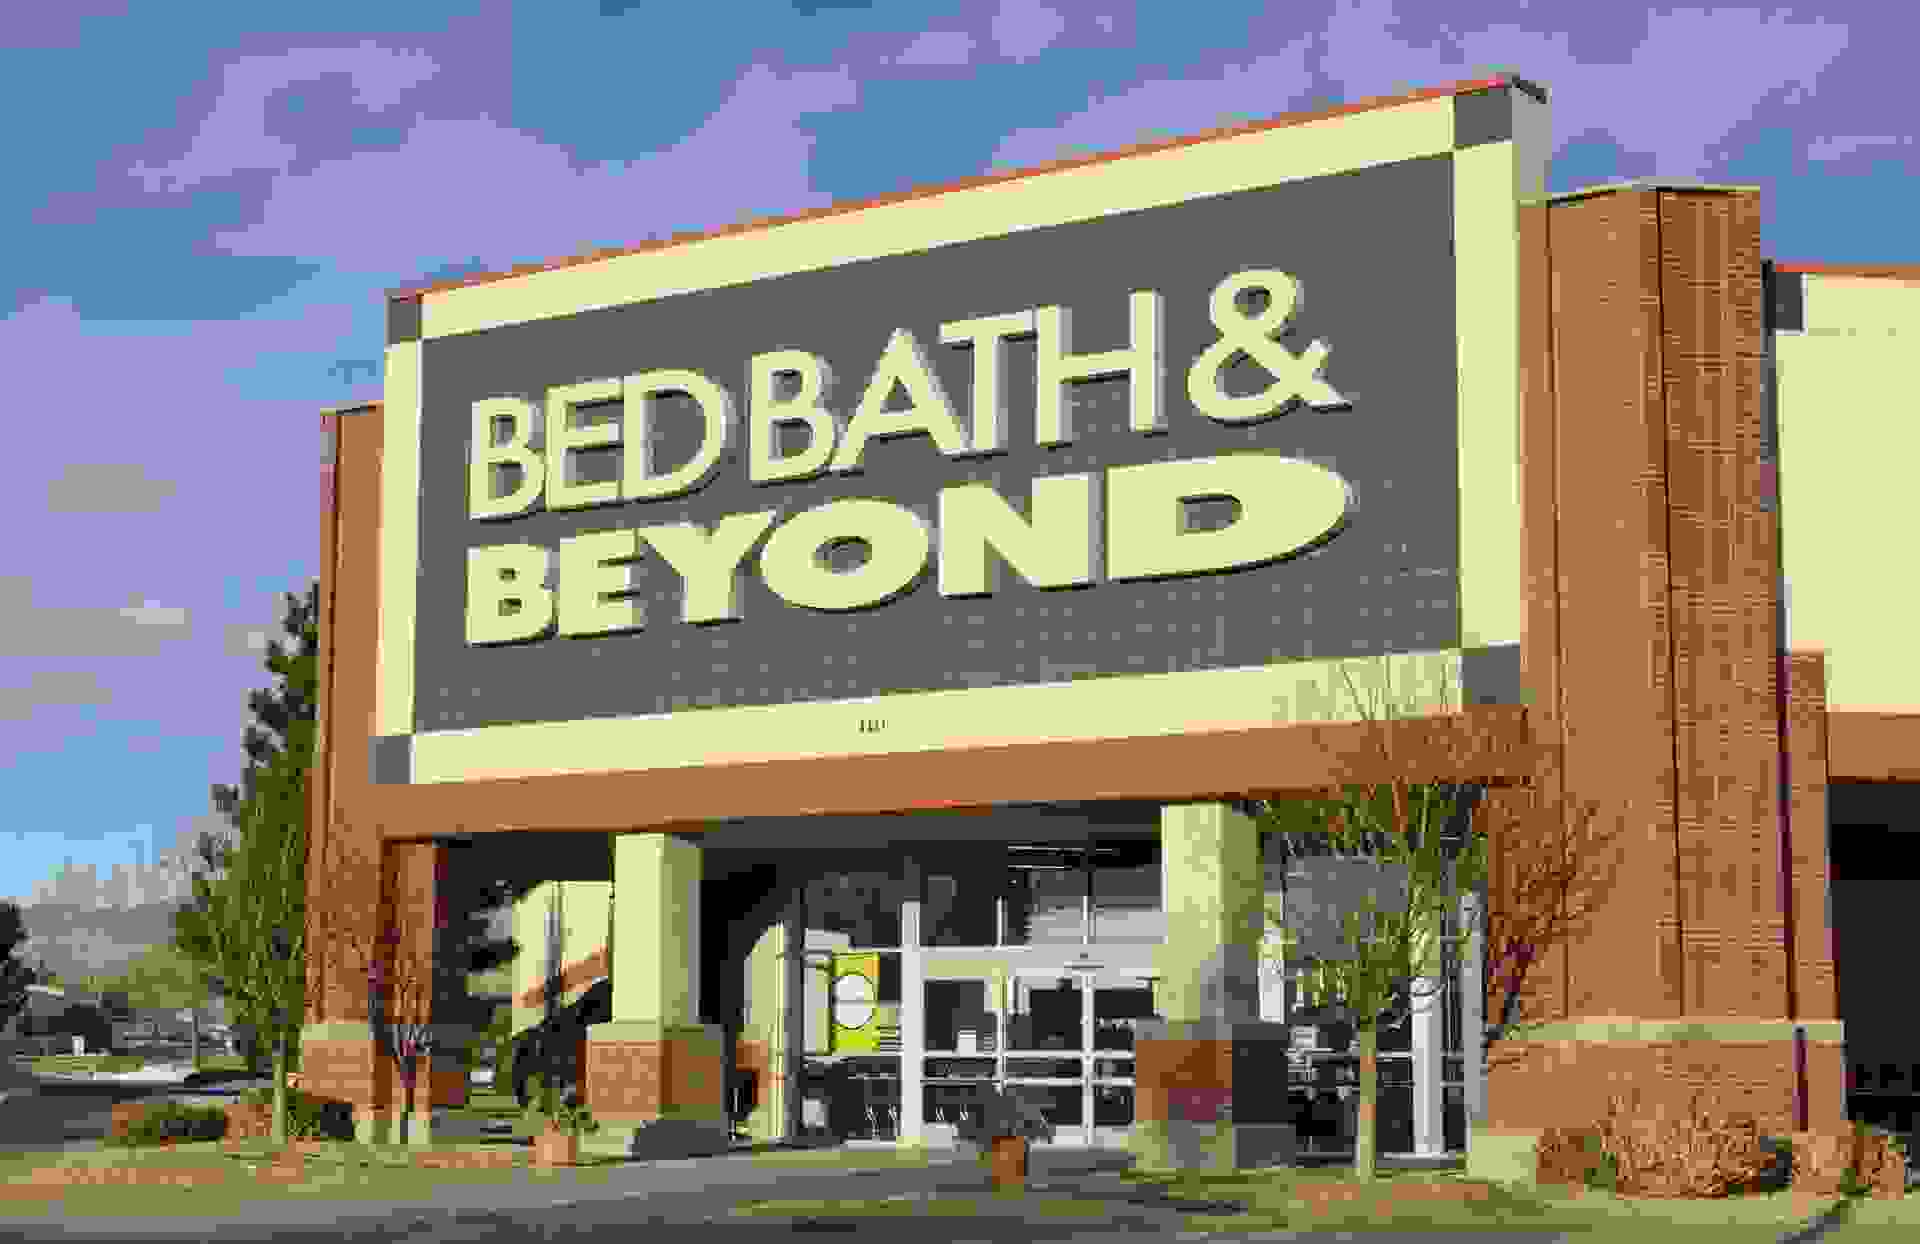 "Fort Collins, Colorado, USA - January 16, 2013: The Bed Bath + Beyond in Fort Collins.